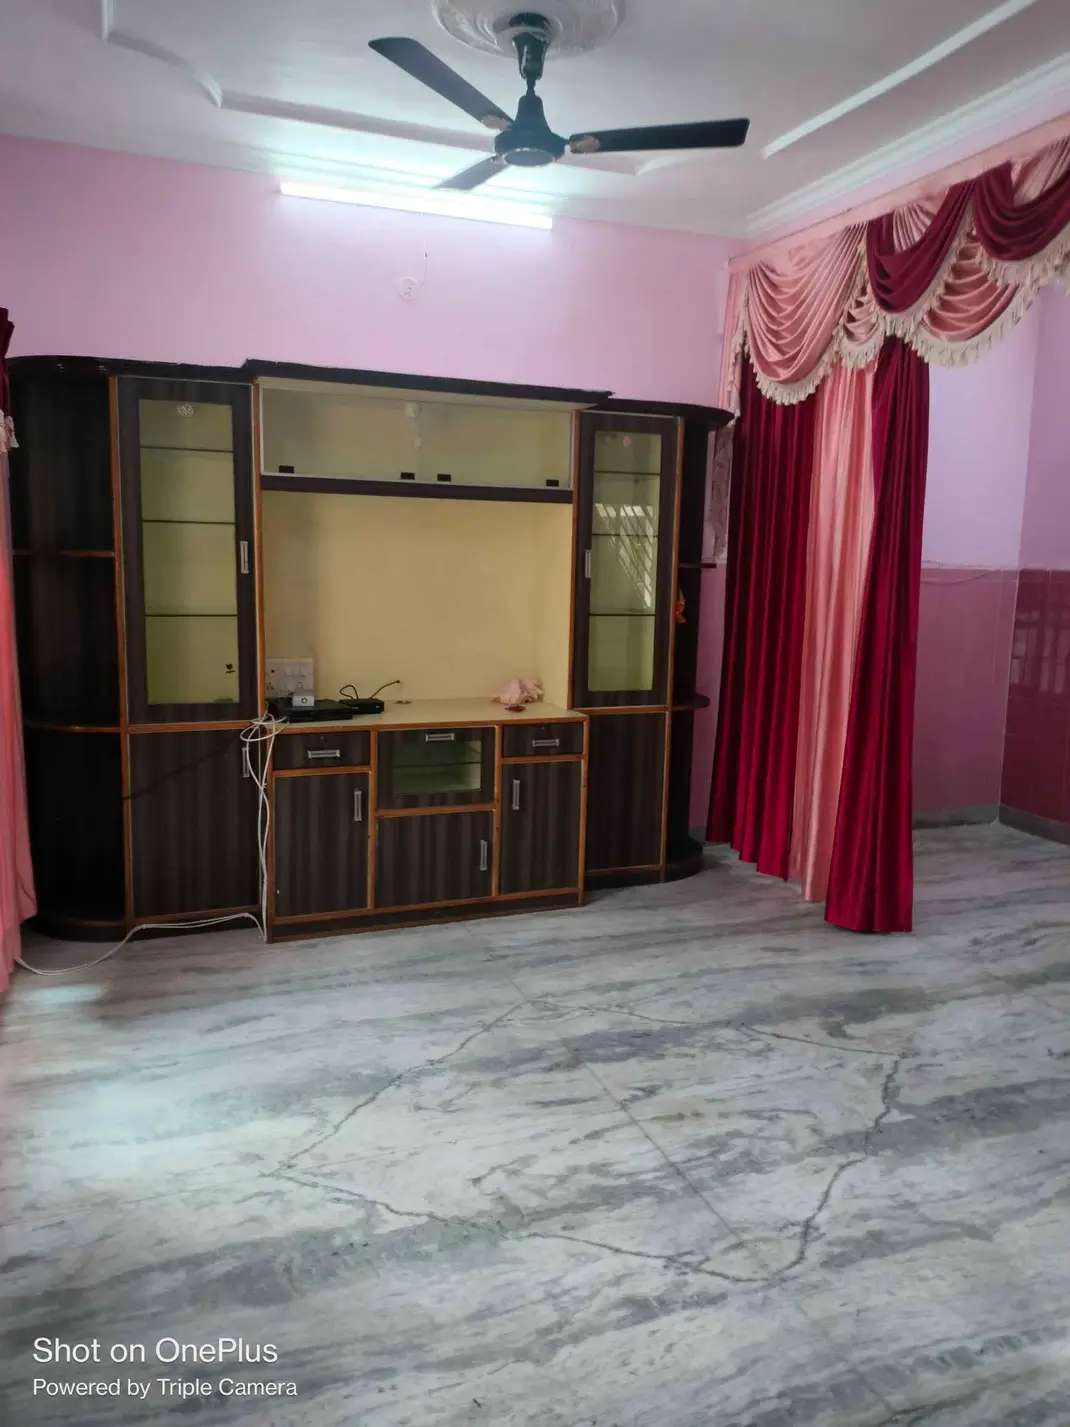 3 Bed/ 3 Bath Rent Apartment/ Flat; 2,050 sq. ft. carpet area, Furnished for rent @Ayodhya bypass road Bhopal